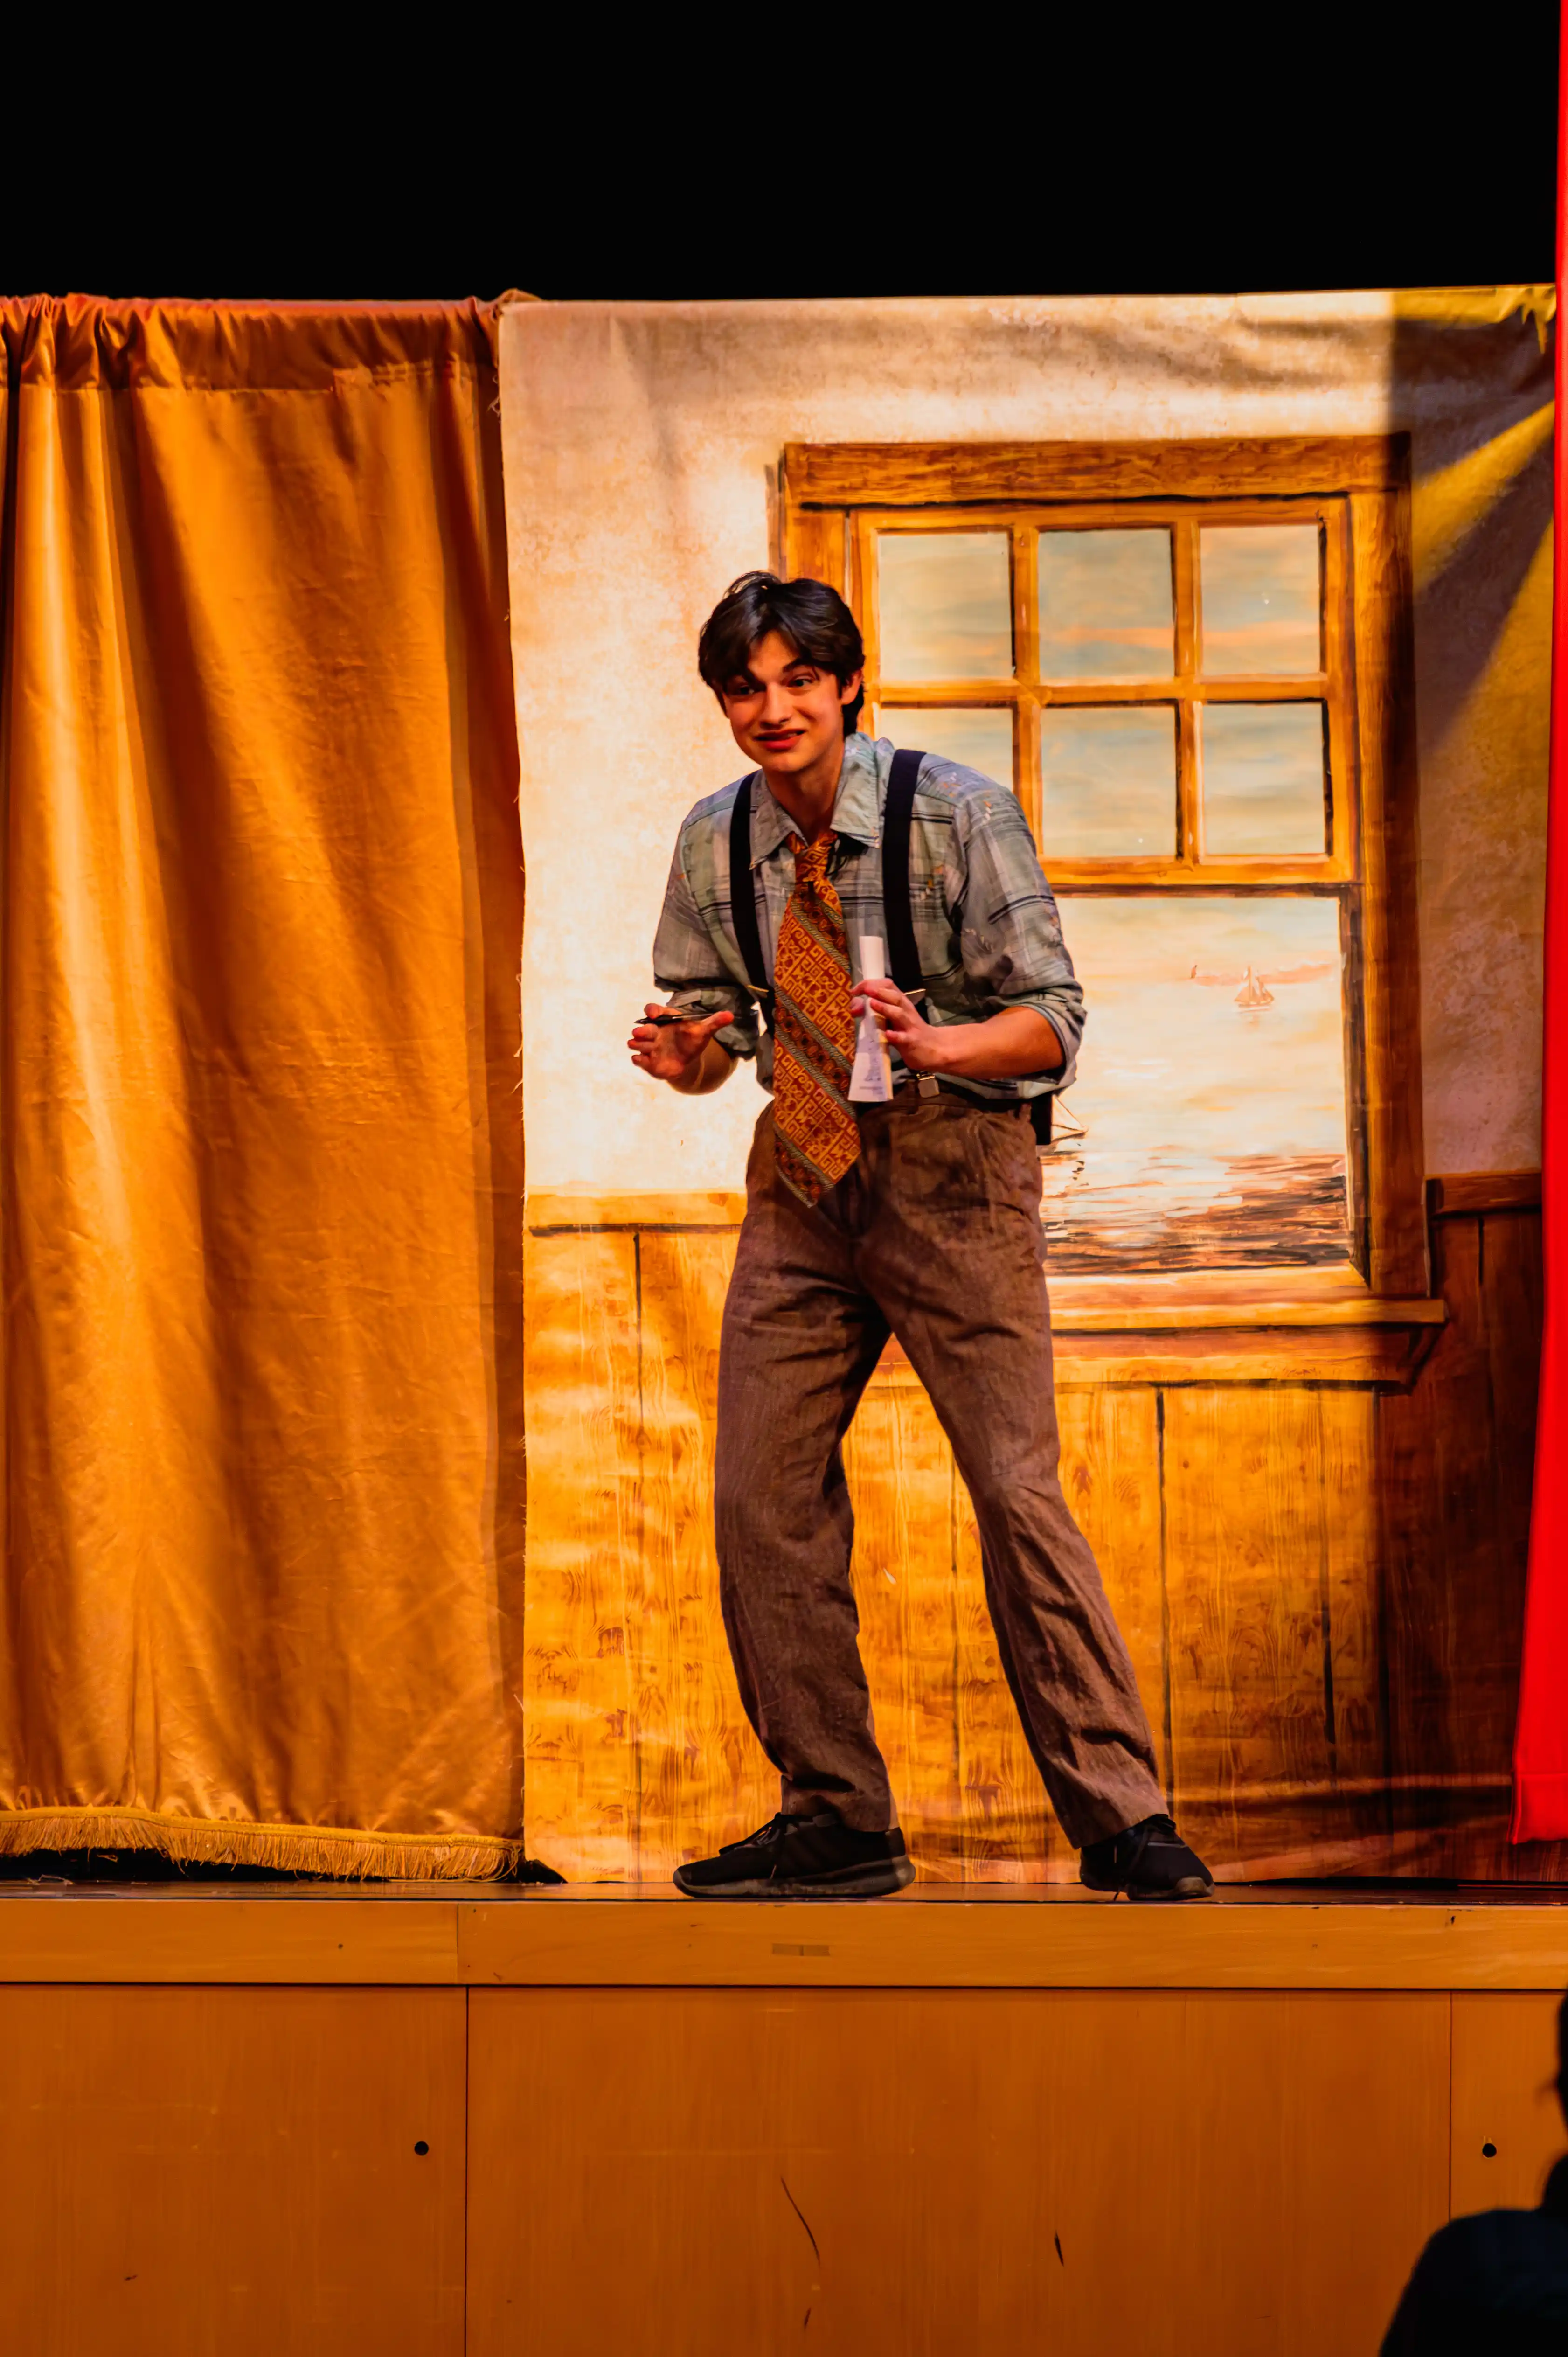 Actor on stage performing a scene with expressive body language, dressed in vintage attire with suspenders and tie, framed by stage curtains against a warmly lit backdrop.